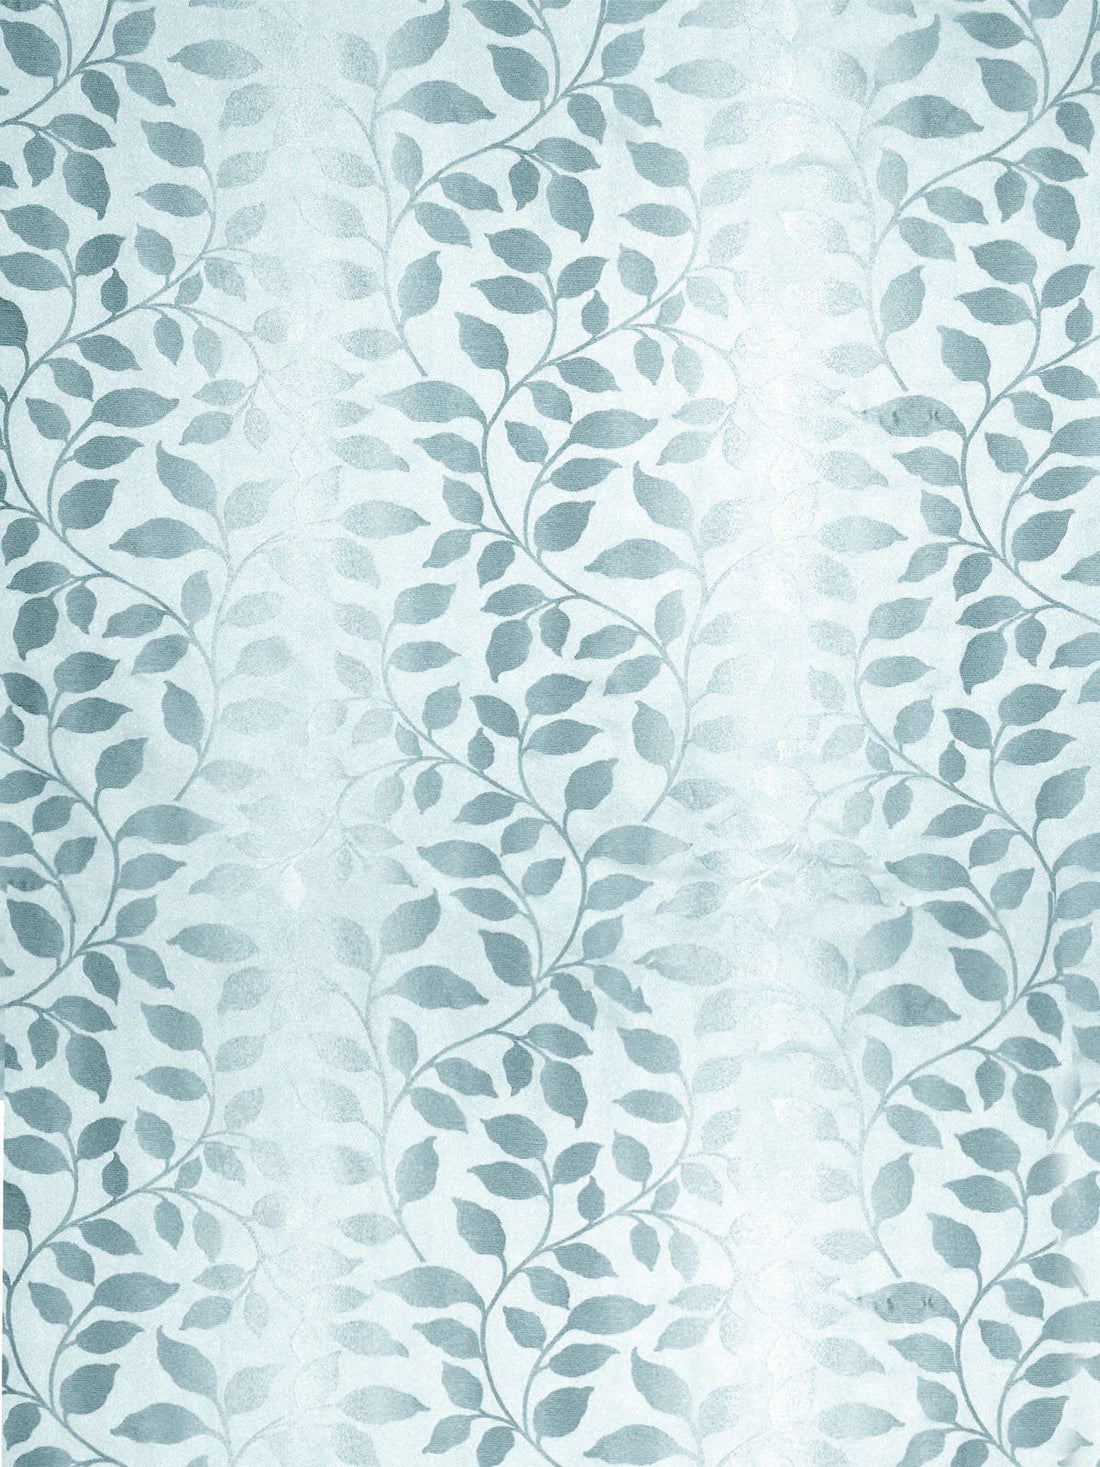 Vallen fabric in tahoe blue color - pattern number JM 00043105 - by Scalamandre in the Old World Weavers collection